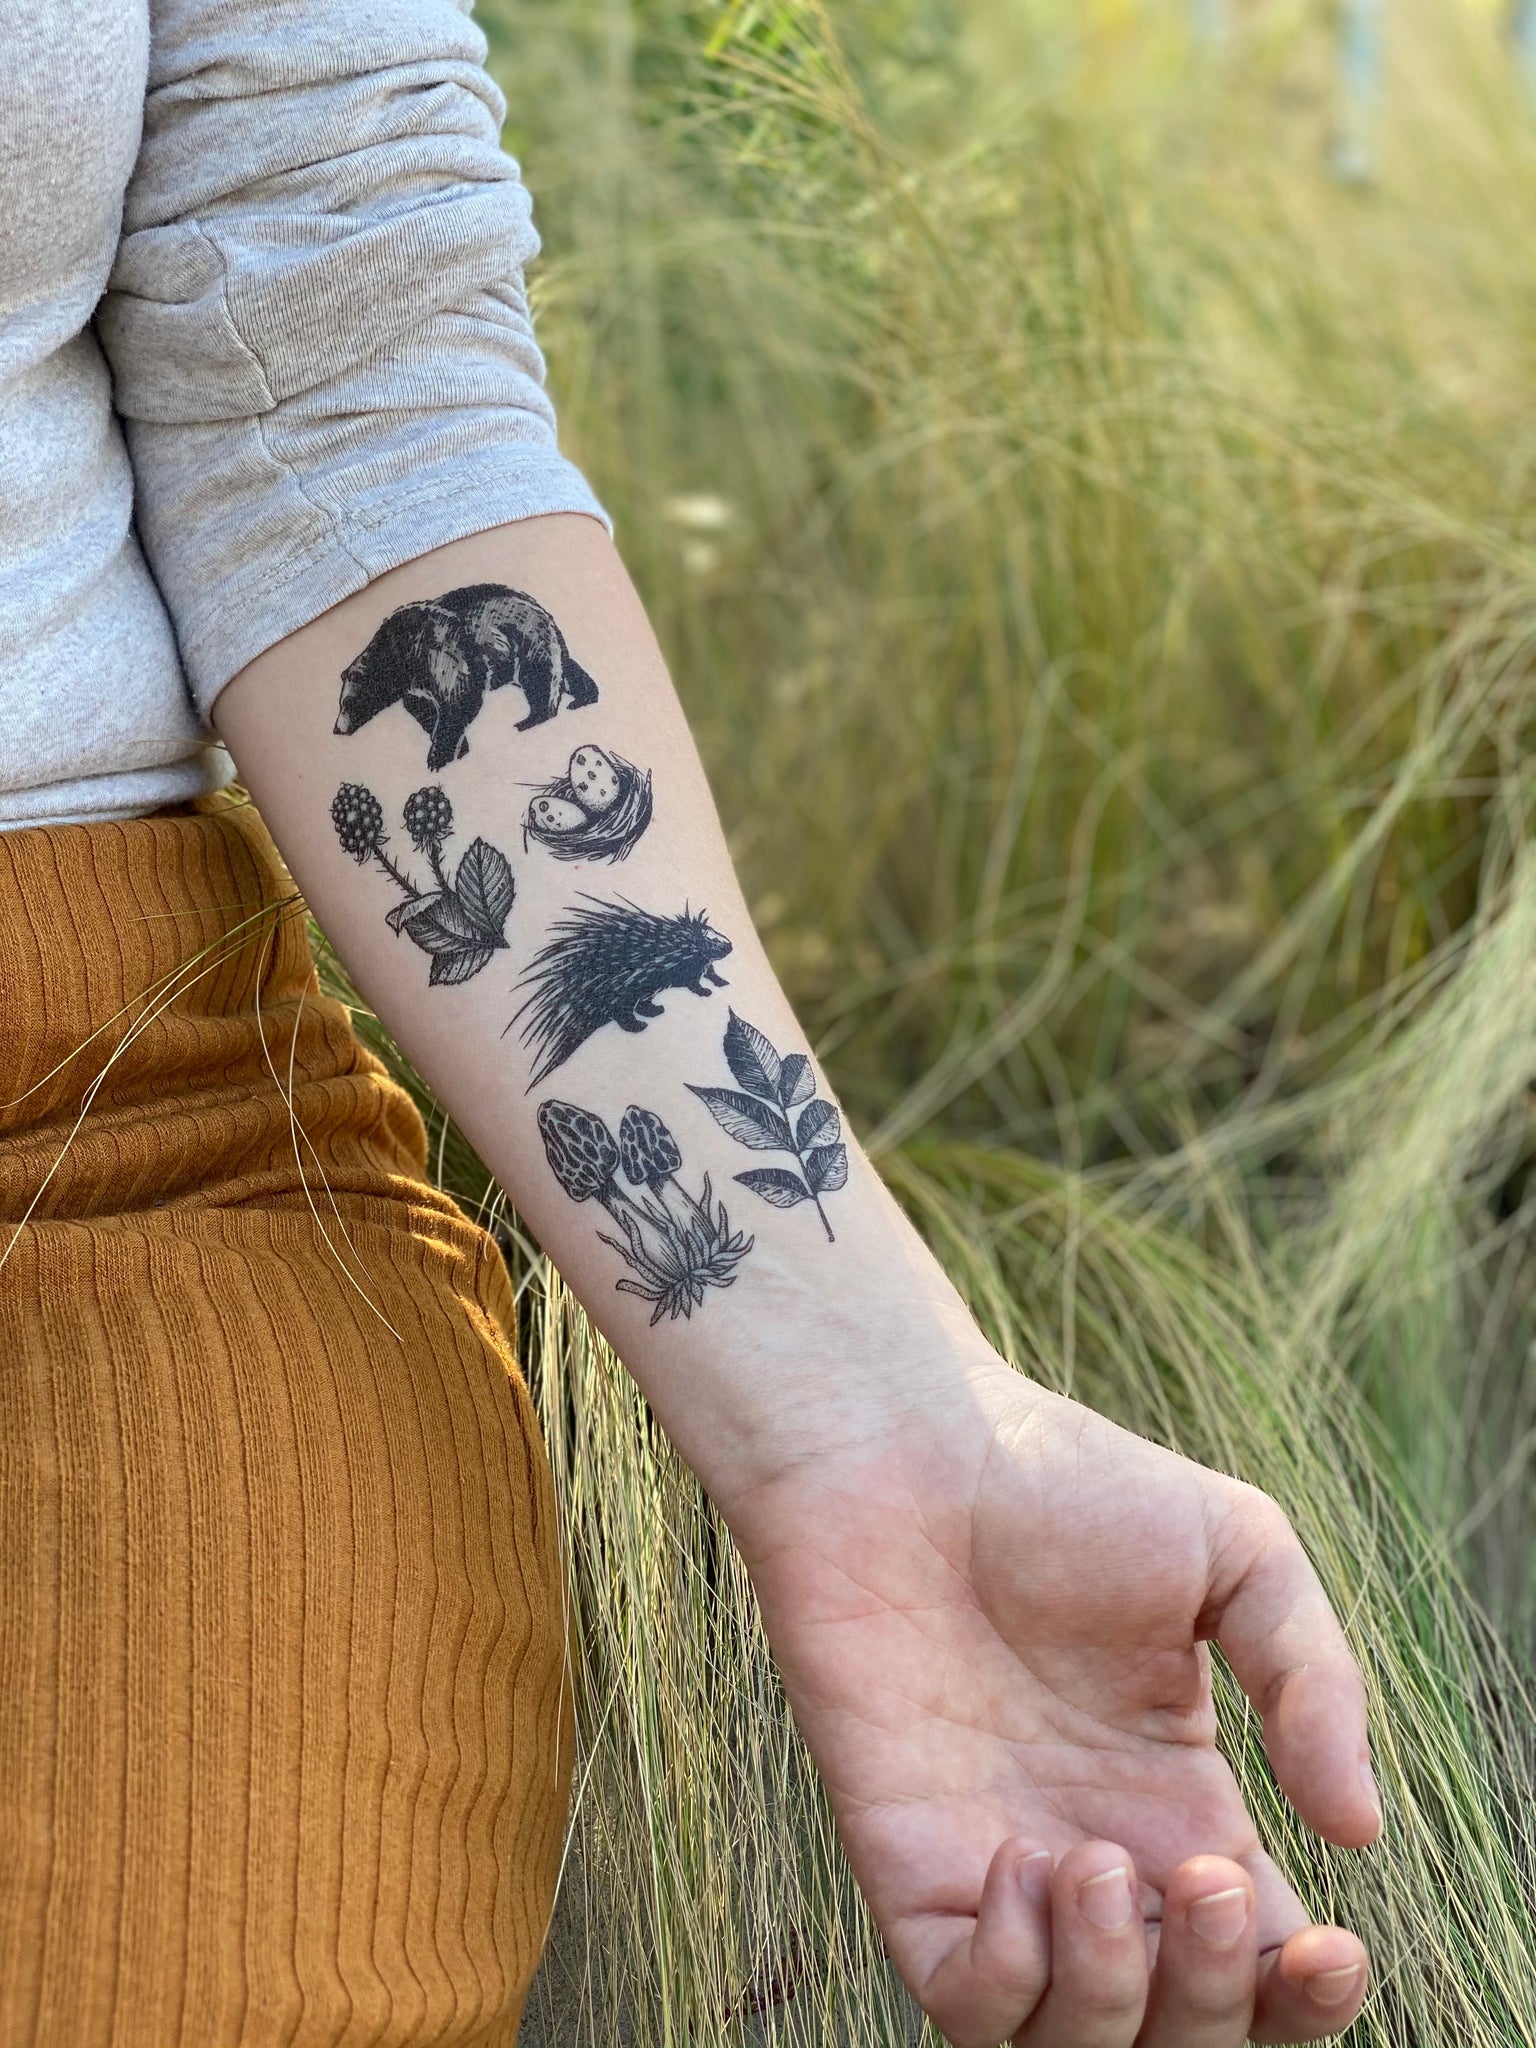 Deepika Das  Tattoo Artist on Instagram Forest tattoo is a symbol of  life serenity and rejuvenation Its meaning has been widen as time goes  by  Forests have been part of